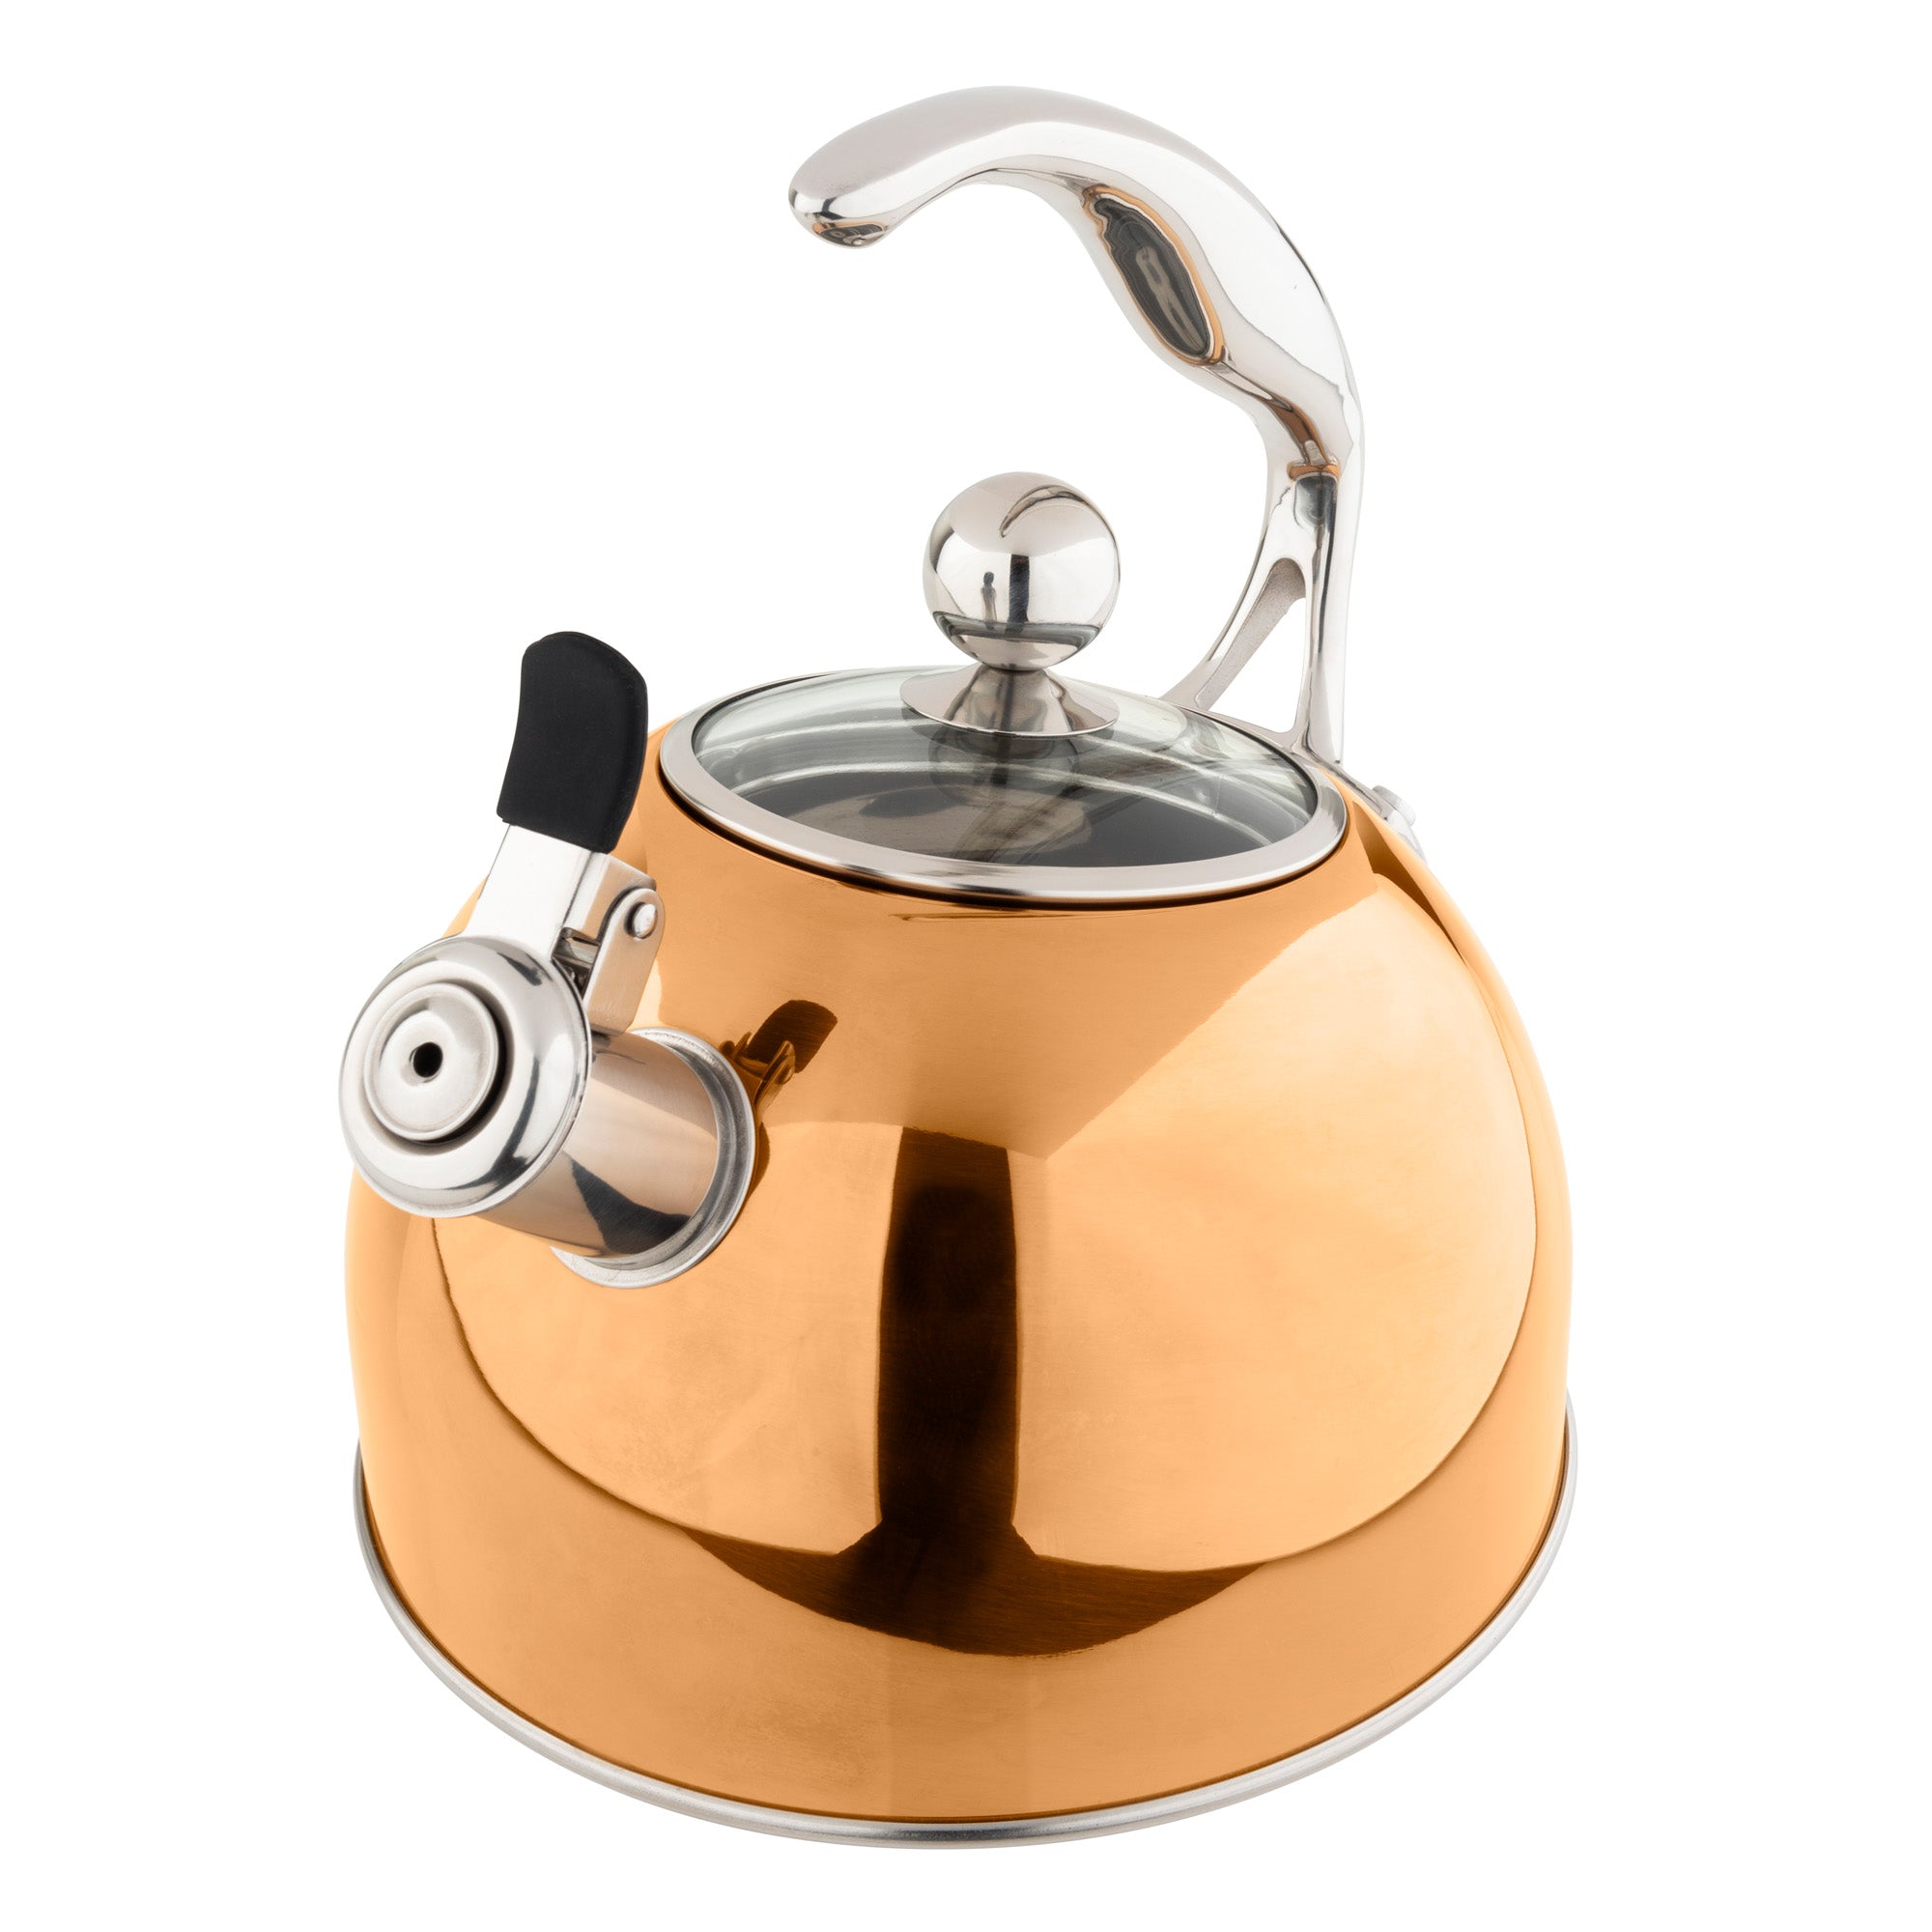 Electric Stainless Steel Kettle